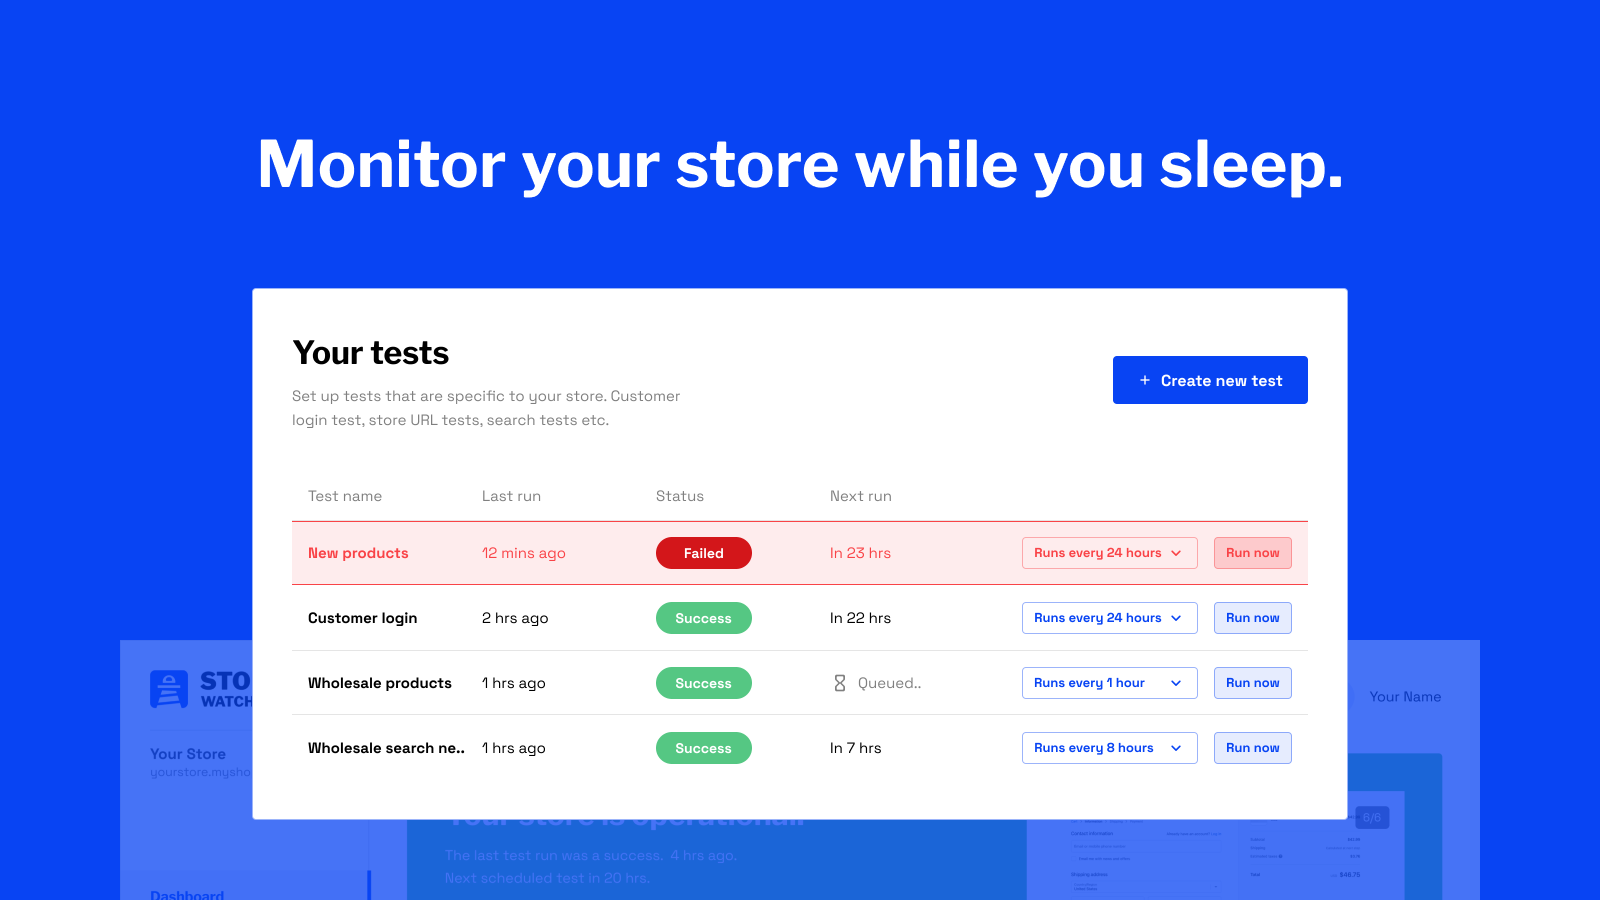 Monitor your store while you sleep.